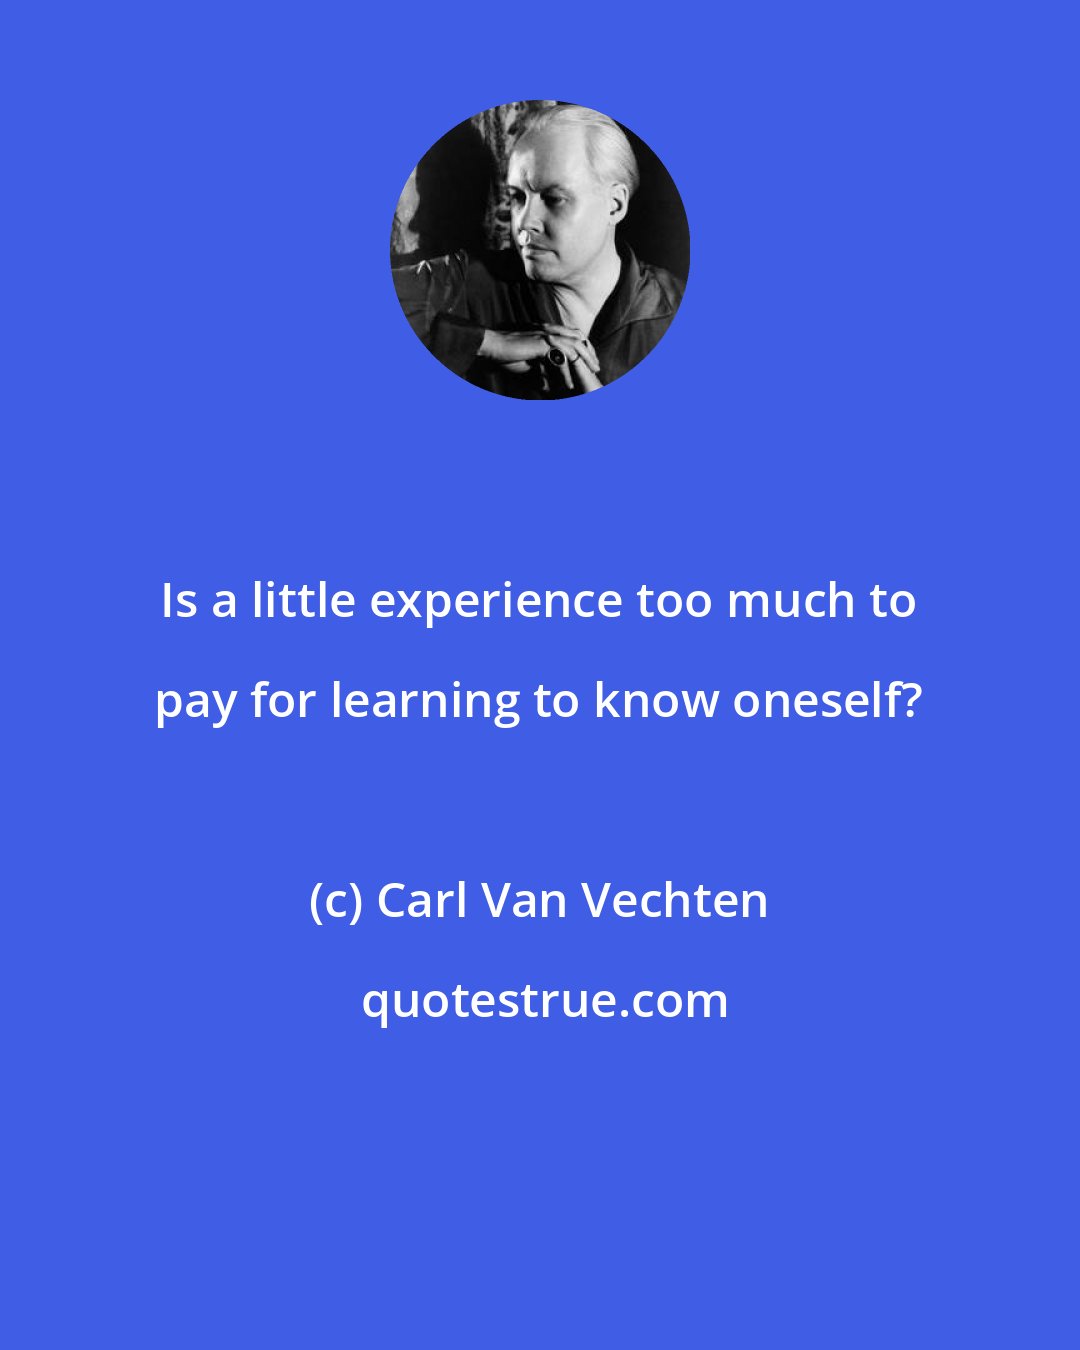 Carl Van Vechten: Is a little experience too much to pay for learning to know oneself?